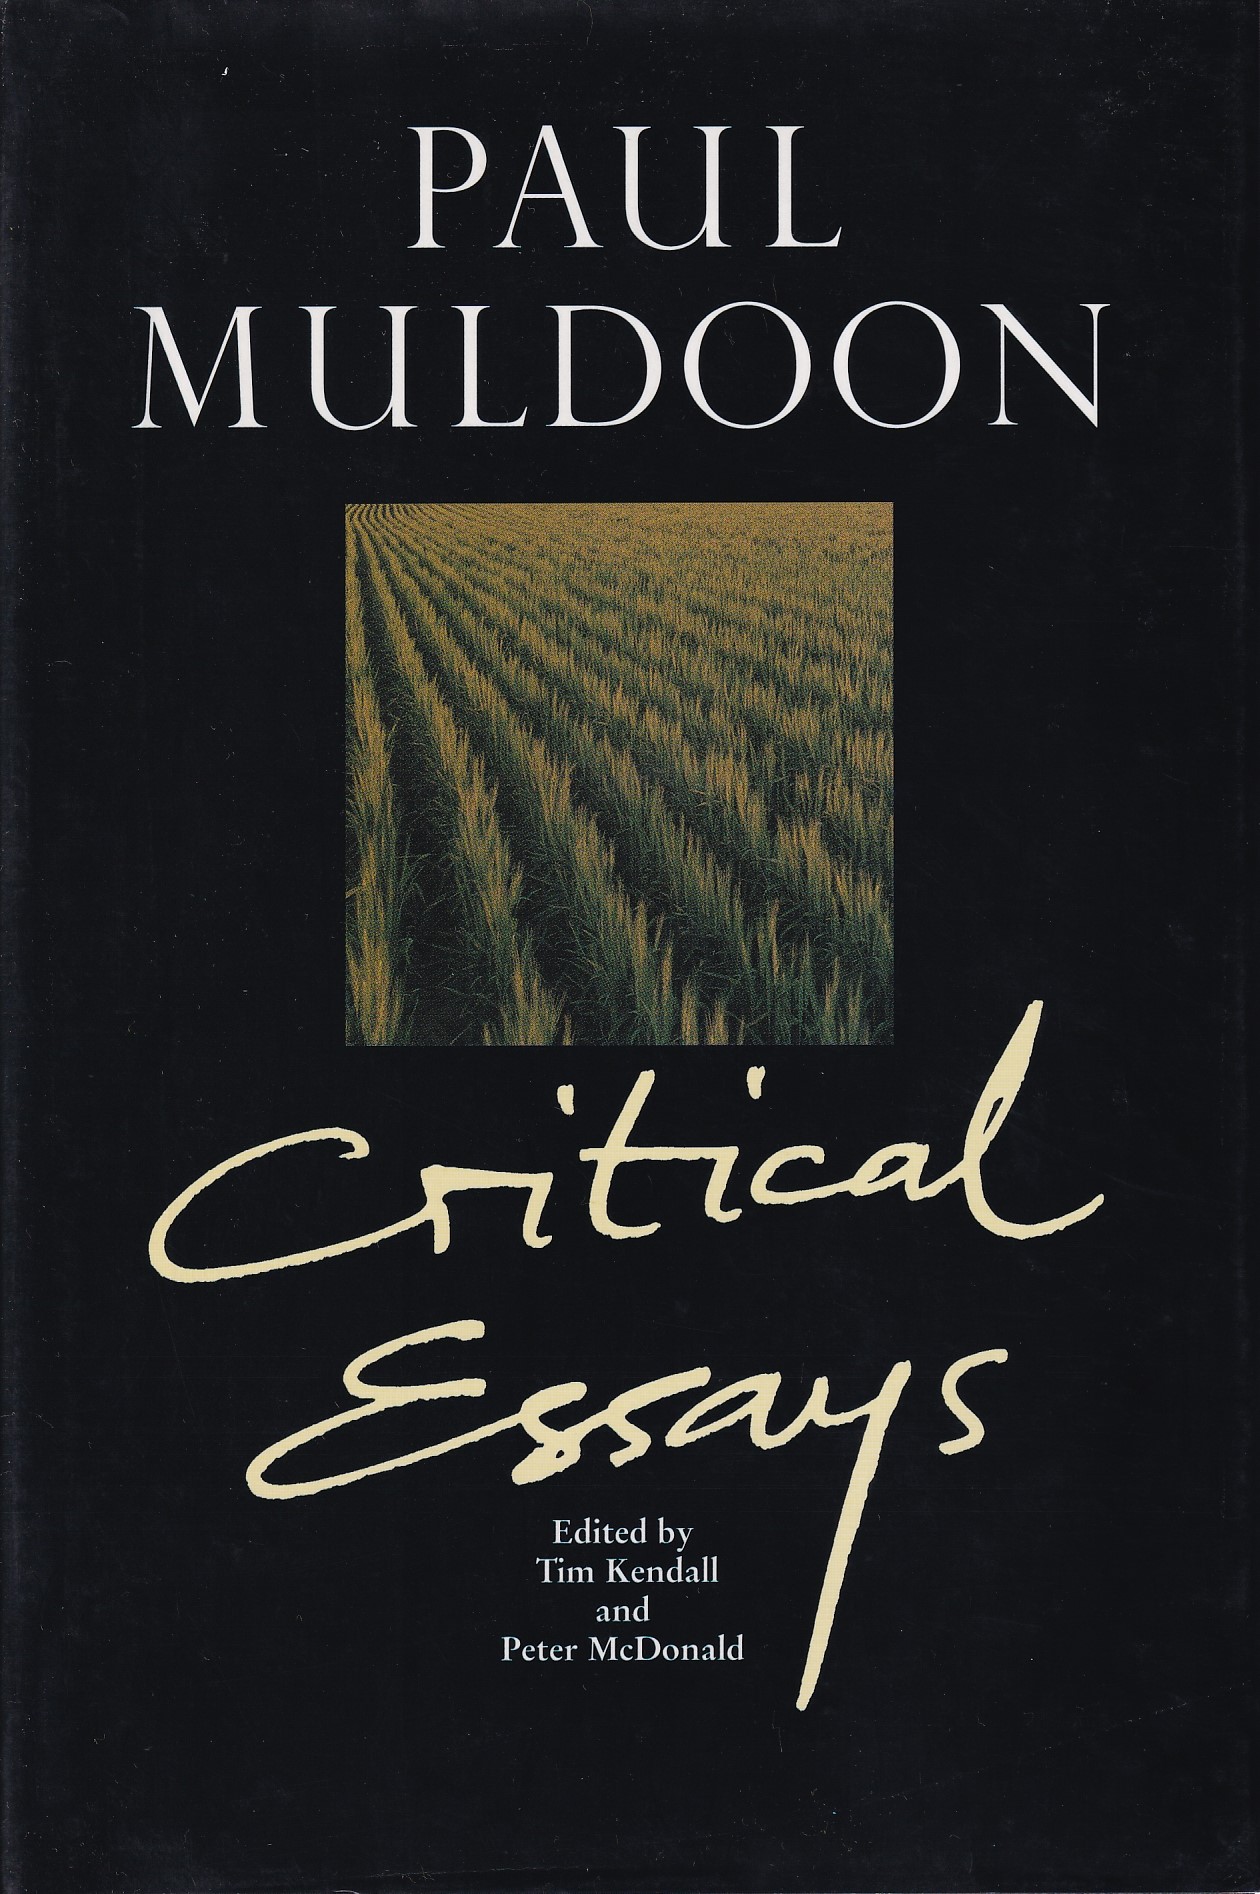 Paul Muldoon: Critical Essays by Paul Muldoon, Tim Kendall & Peter McDonald (eds.)